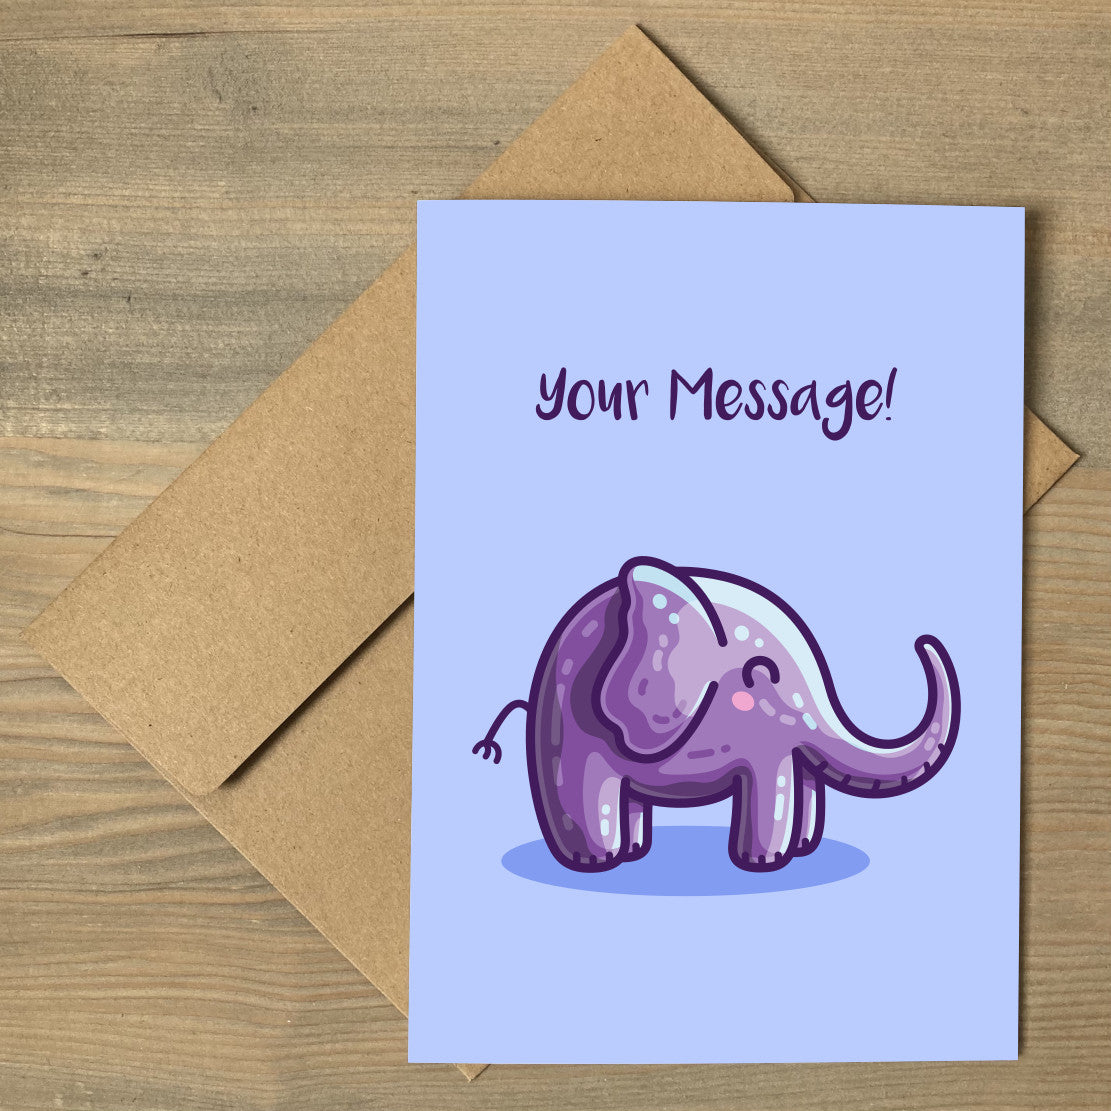 A blue greeting card lying flat on a brown envelope, with a design of an adorable cute purple elephant facing to the right and with personalised wording above